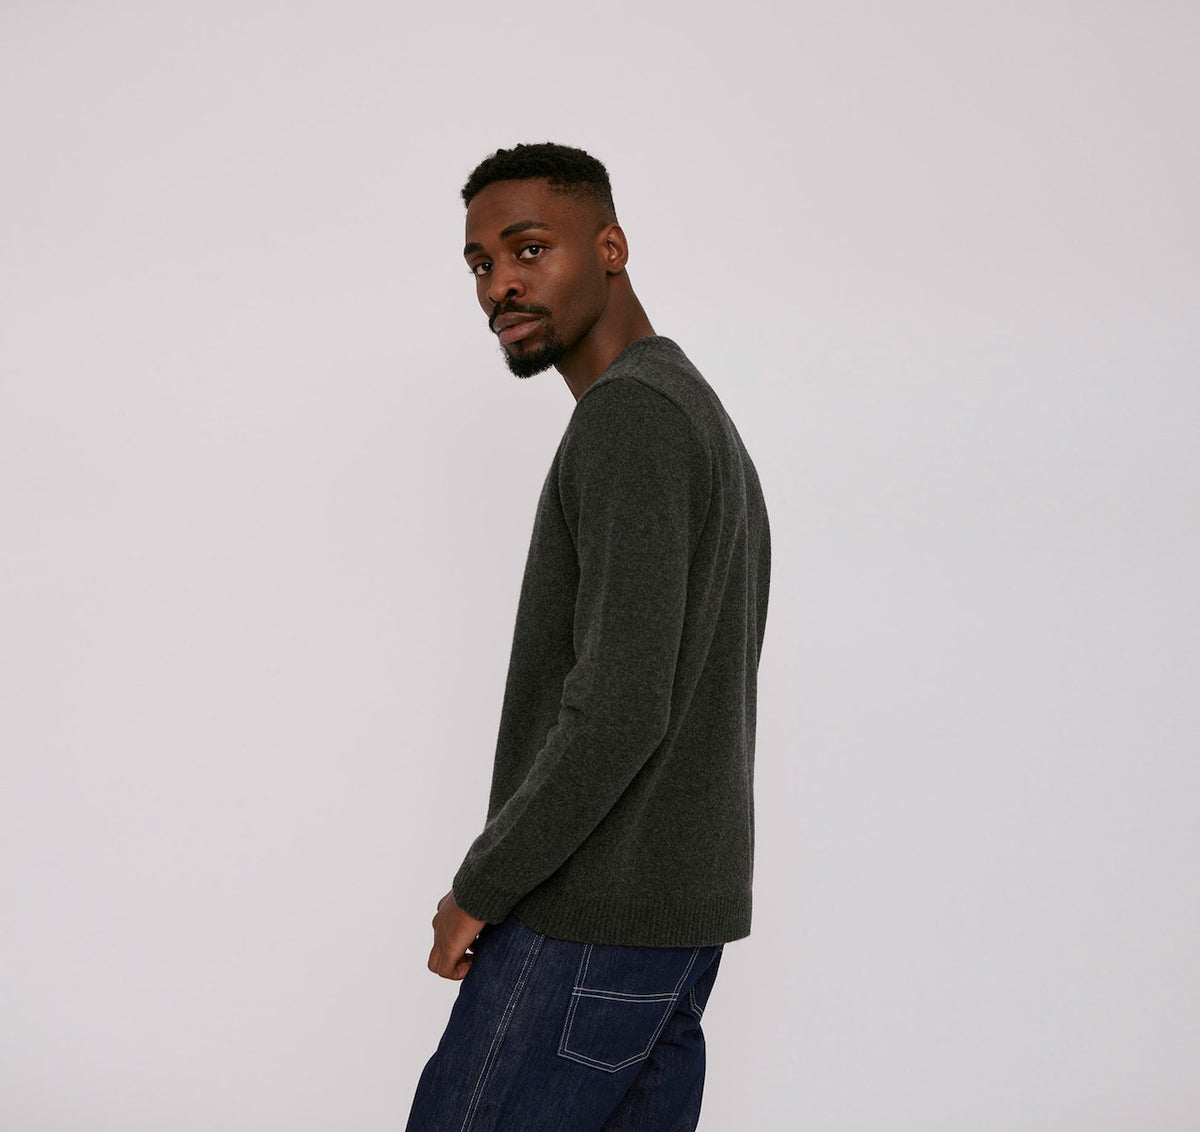 A man wearing an Organic Basics Recycled Wool Knit Jumper - Charcoal Melange sweater and jeans.